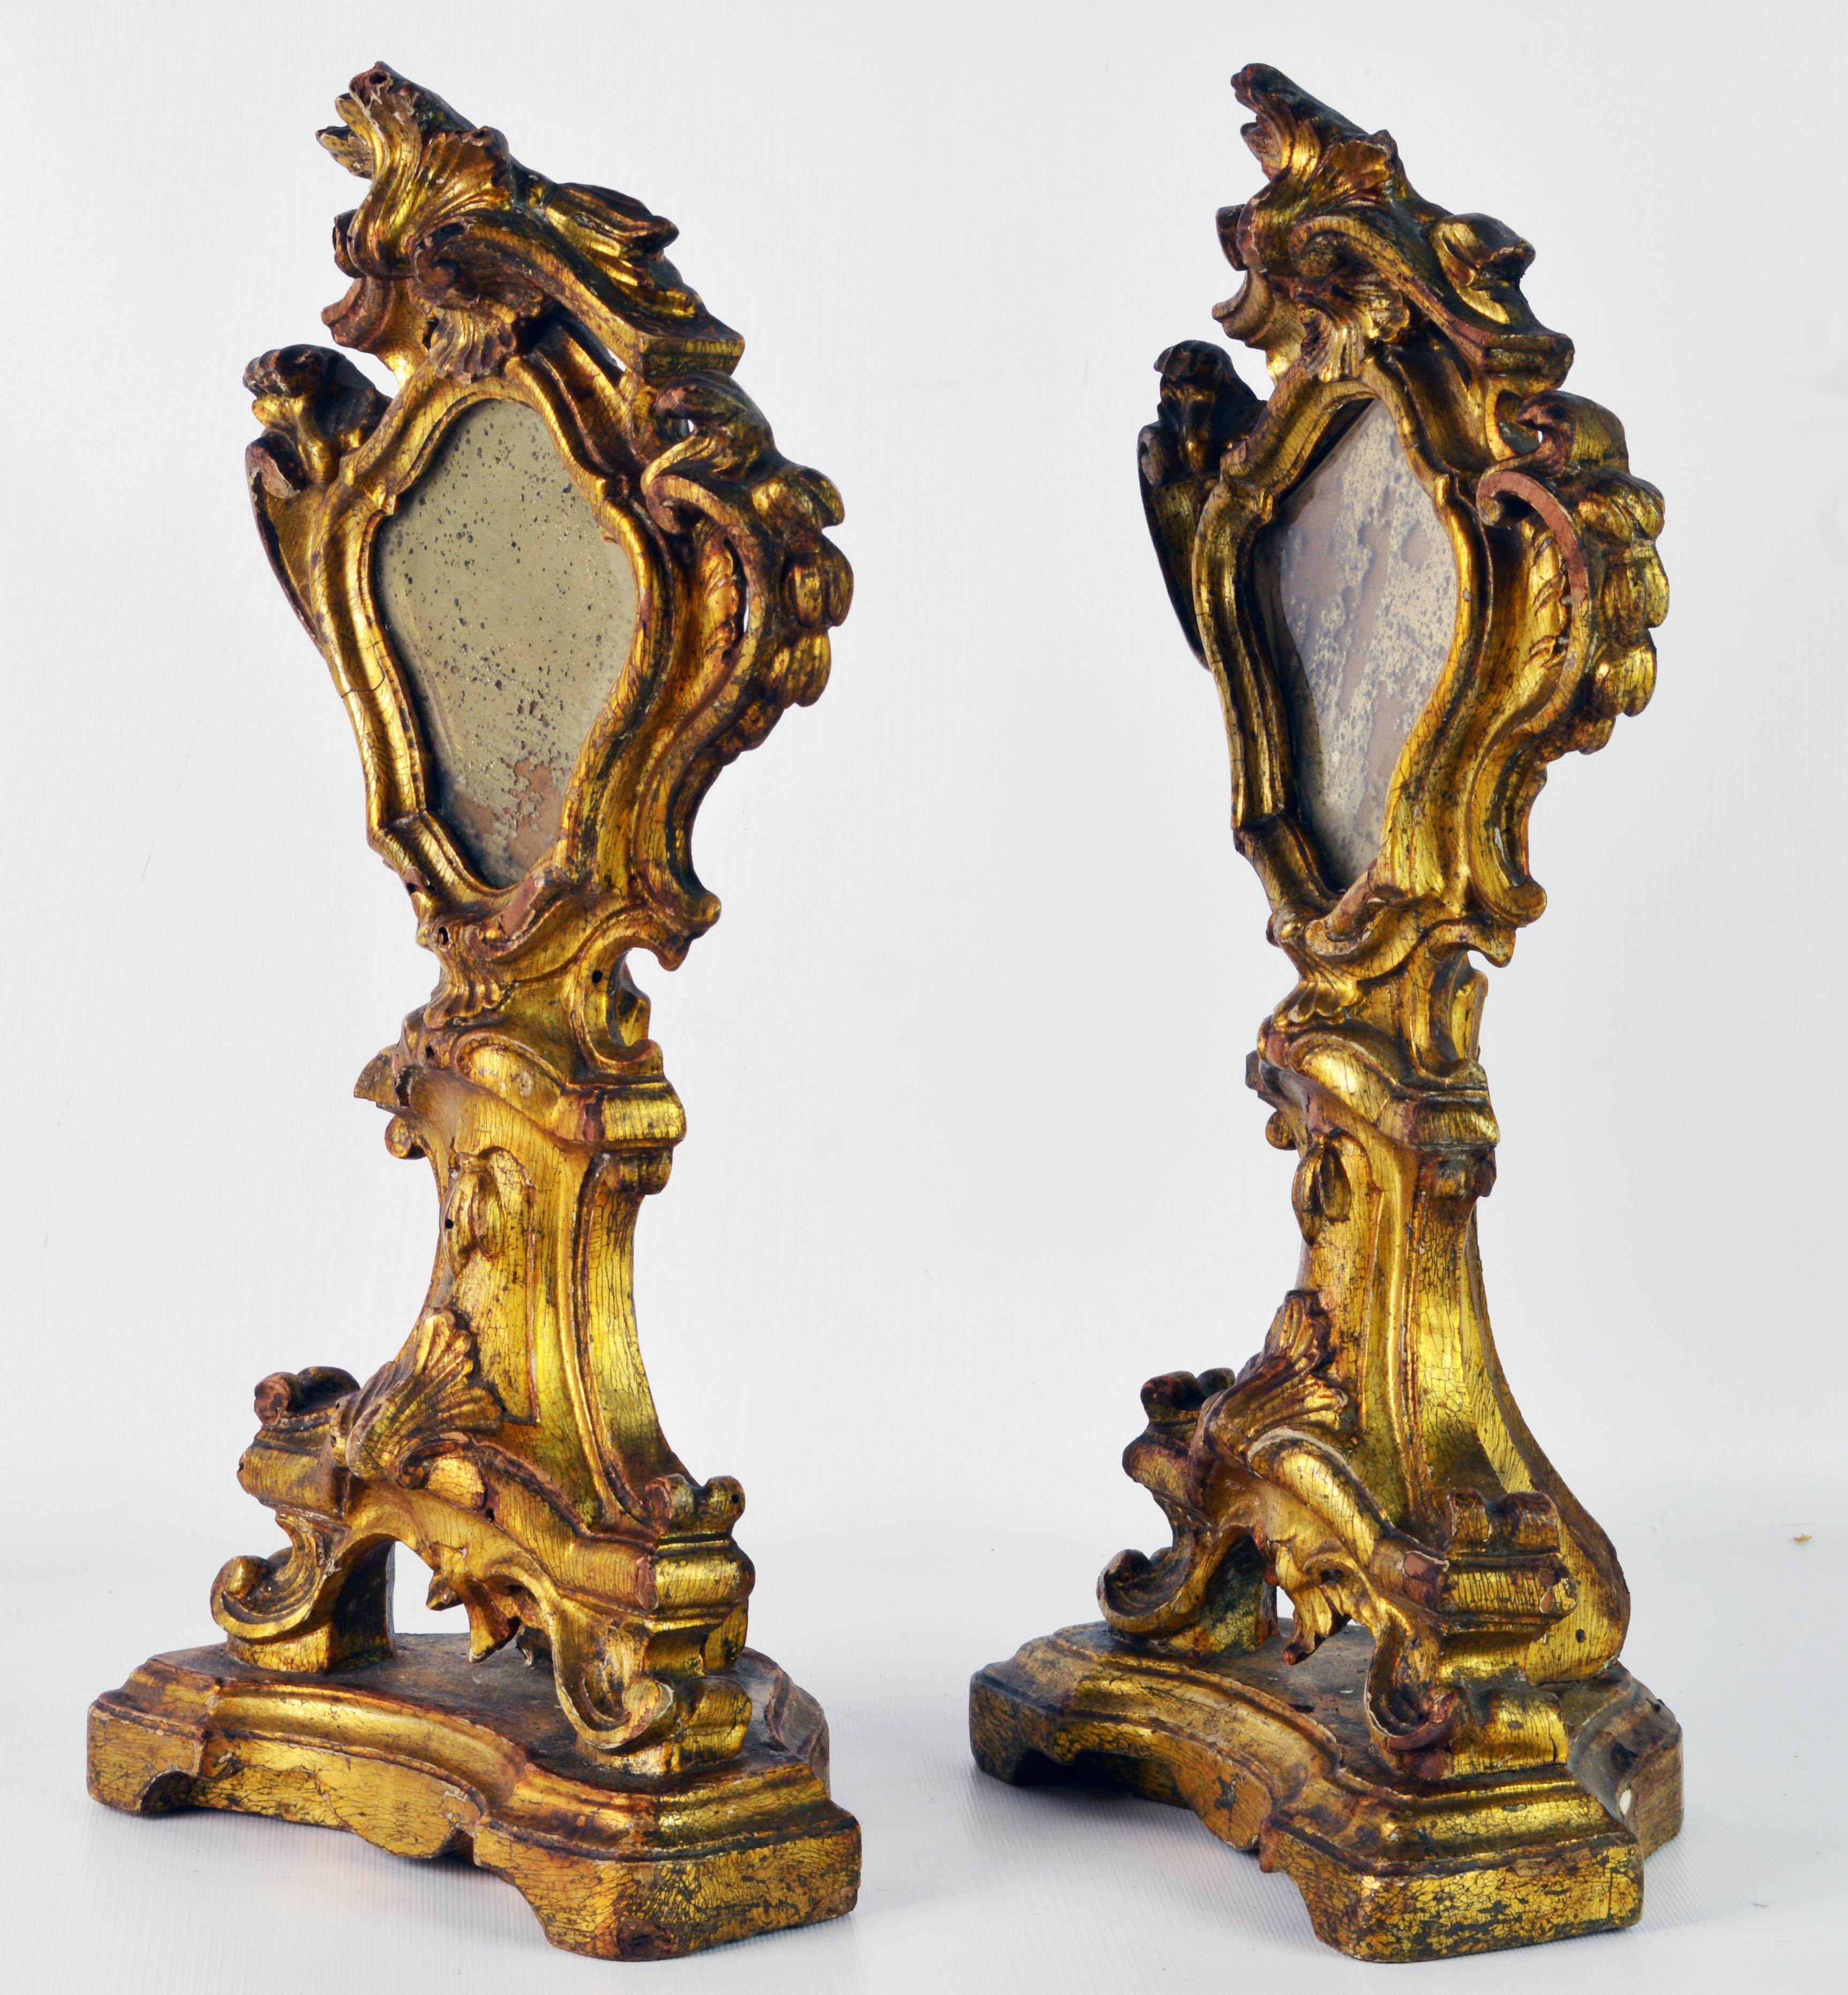 Mirror Pair of Mid-19th Century Italian Baroque Style Carved Giltwood Reliquaries